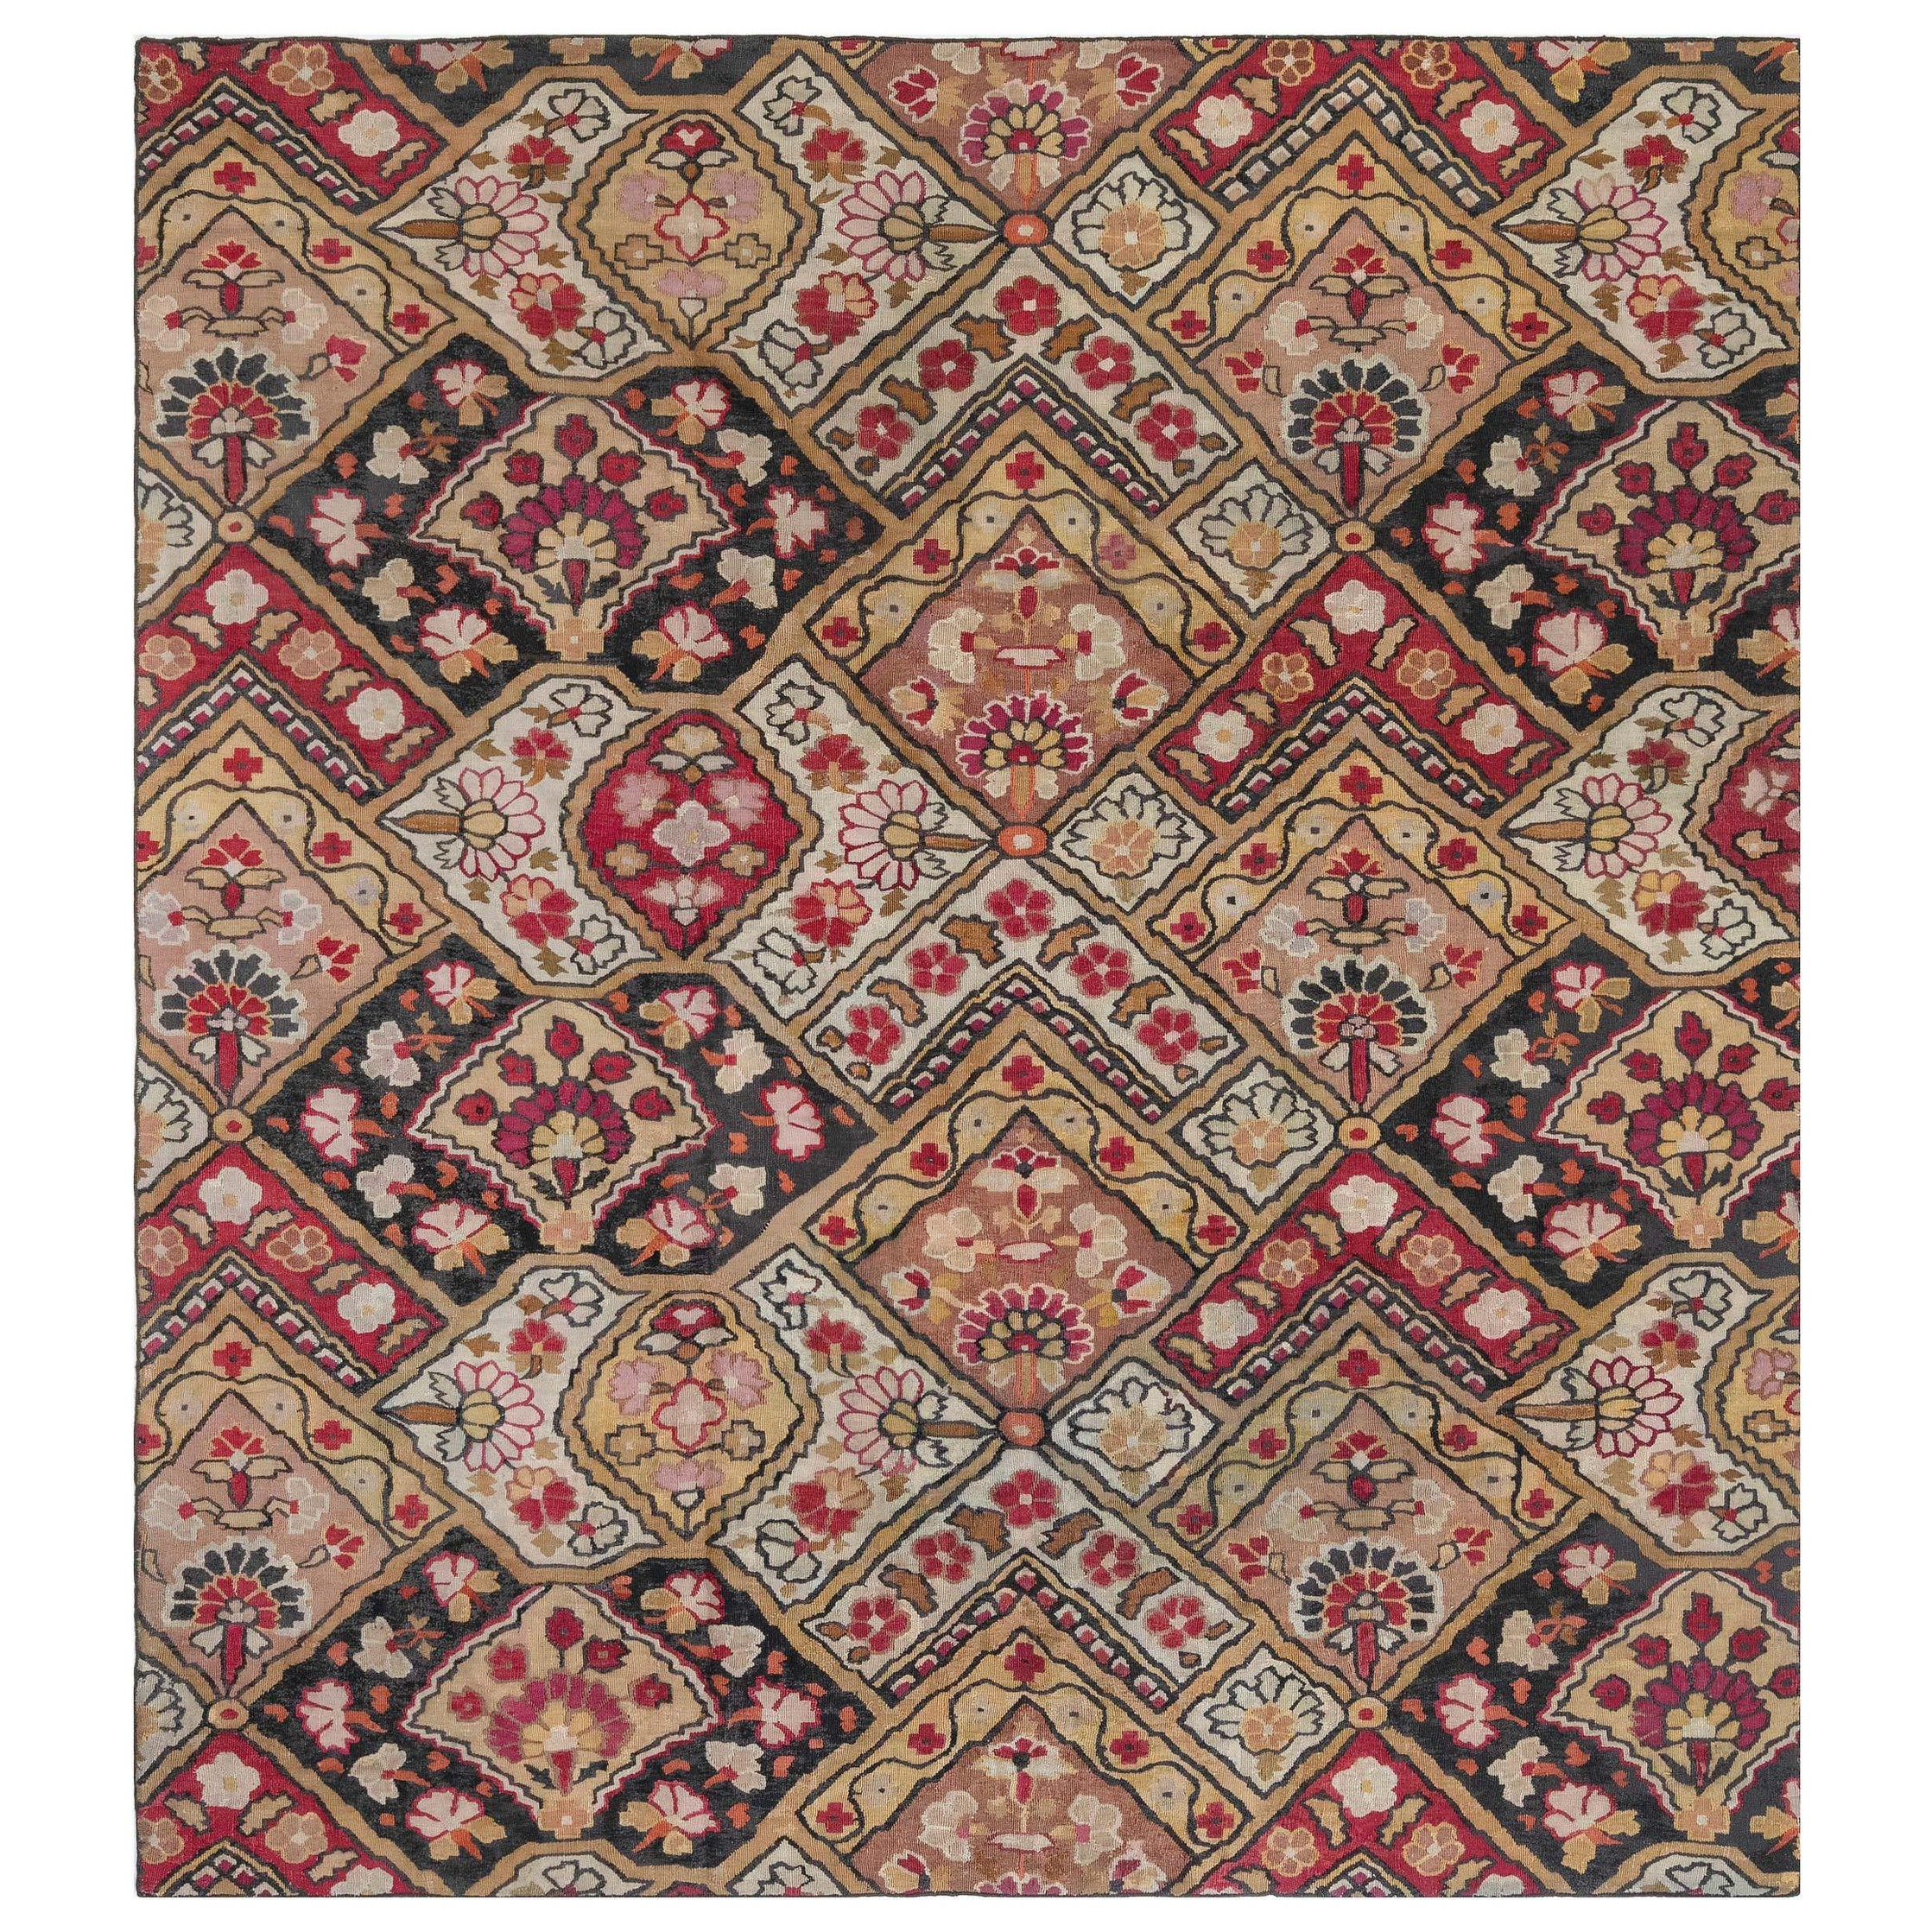 Authentic 19th Century French Aubusson Handmade Rug For Sale